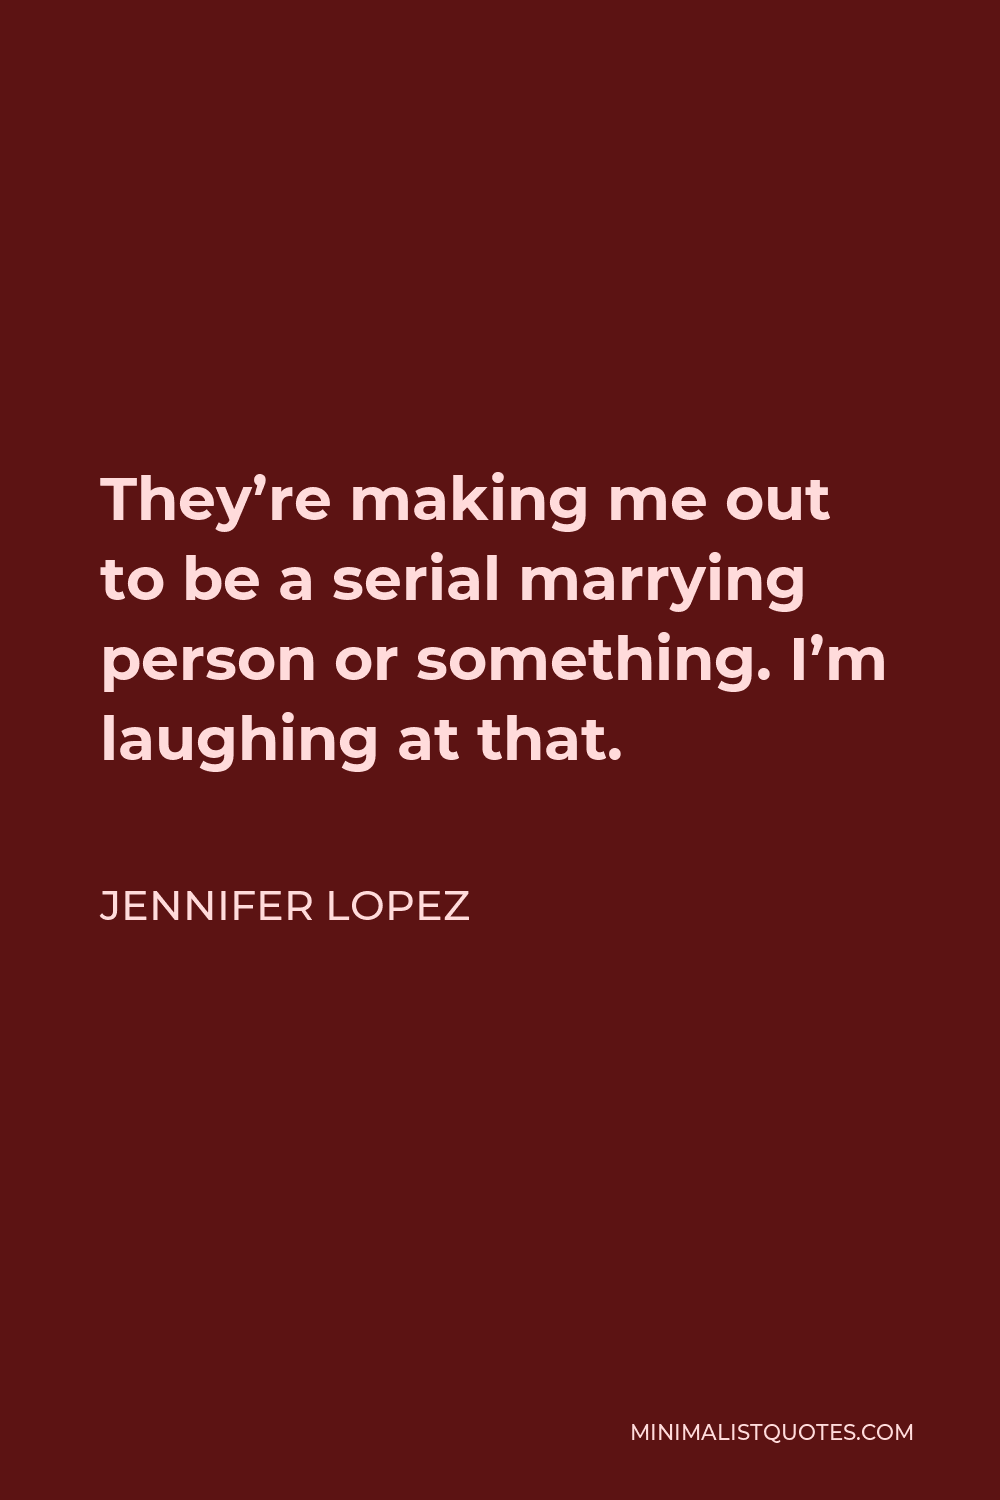 Jennifer Lopez Quote - They’re making me out to be a serial marrying person or something. I’m laughing at that.